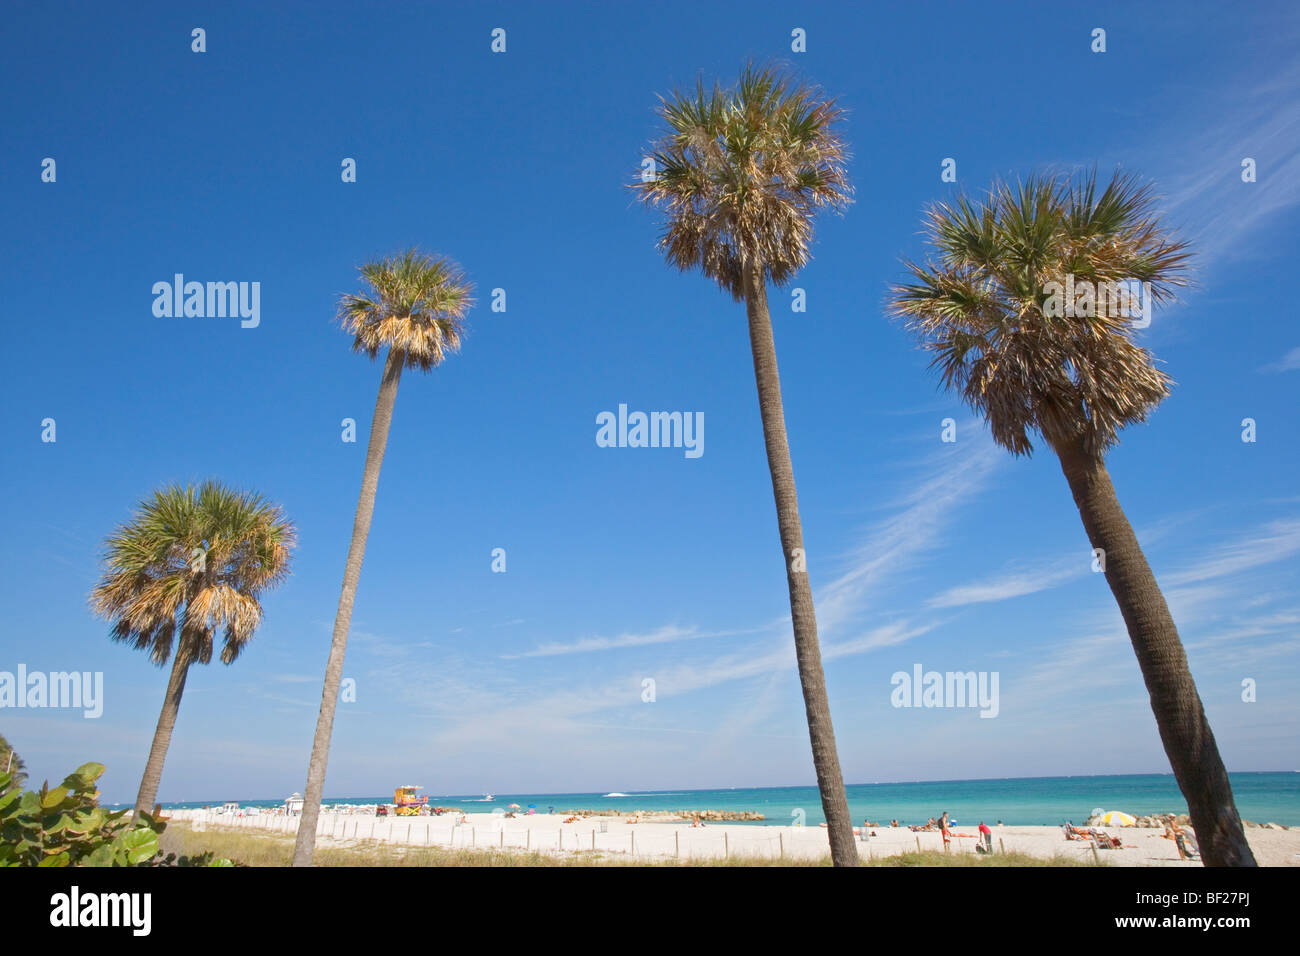 Palm trees under blue sky at the beach at Boardwalk District, Miami Beach, Florida, USA Stock Photo